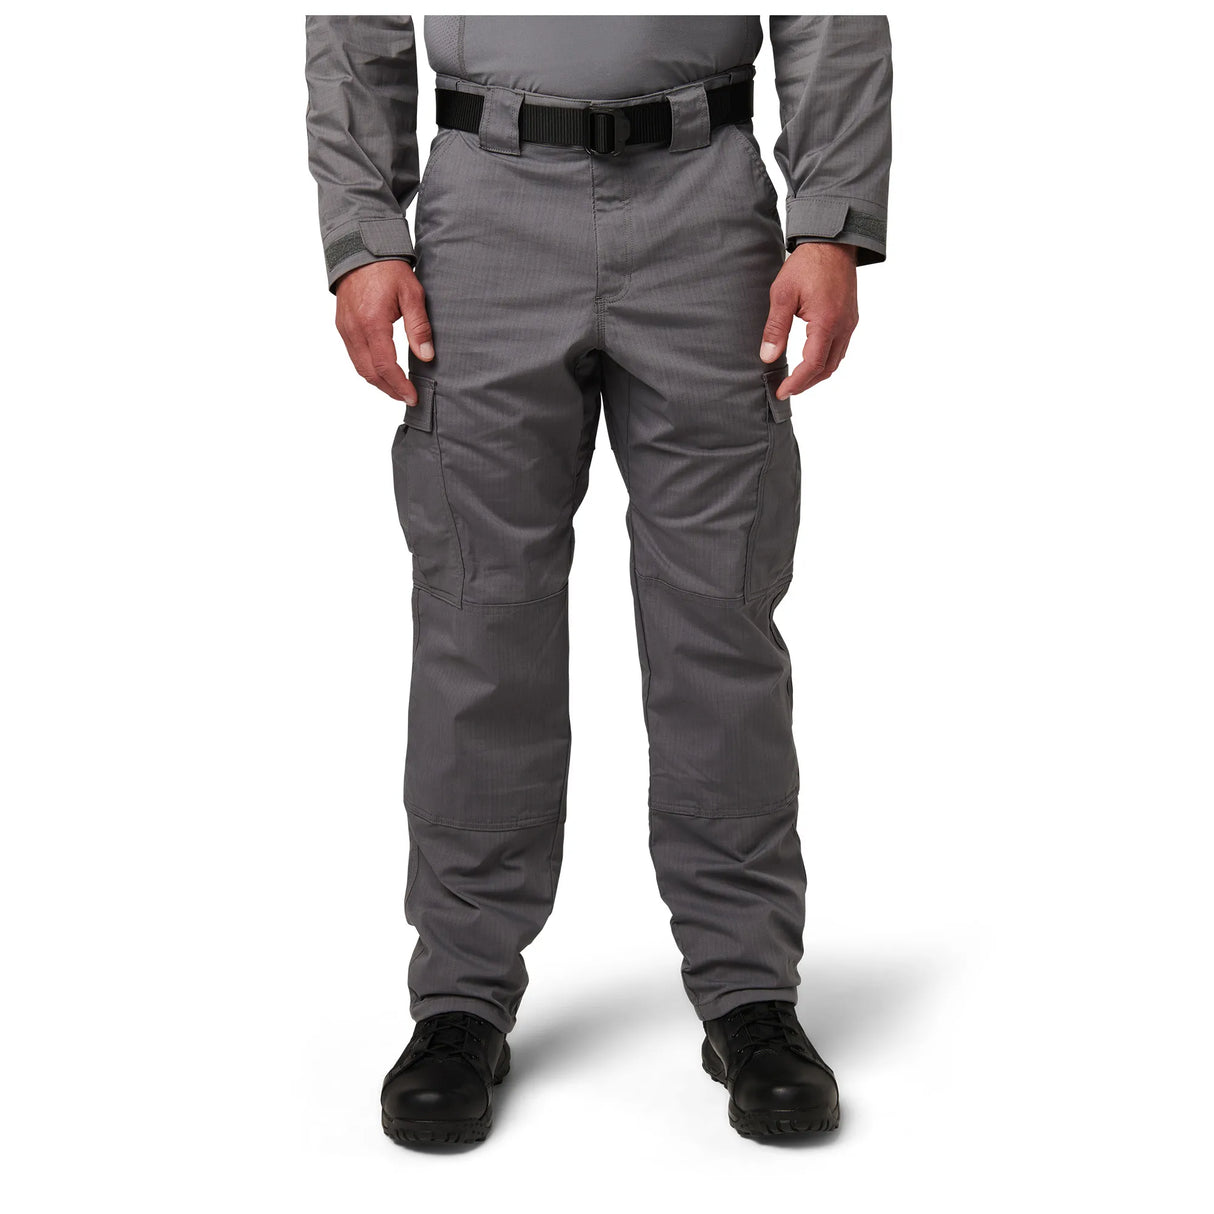 Crafted with 5.11's Flex-Tac® mechanical stretch fabric, the TDU® Pant offers durability and functionality for tactical duty. Features include a self-adjusting tunnel waistband, reinforced seat and knees, and pleated cargo pockets with TacTec™ compatibility. (320)